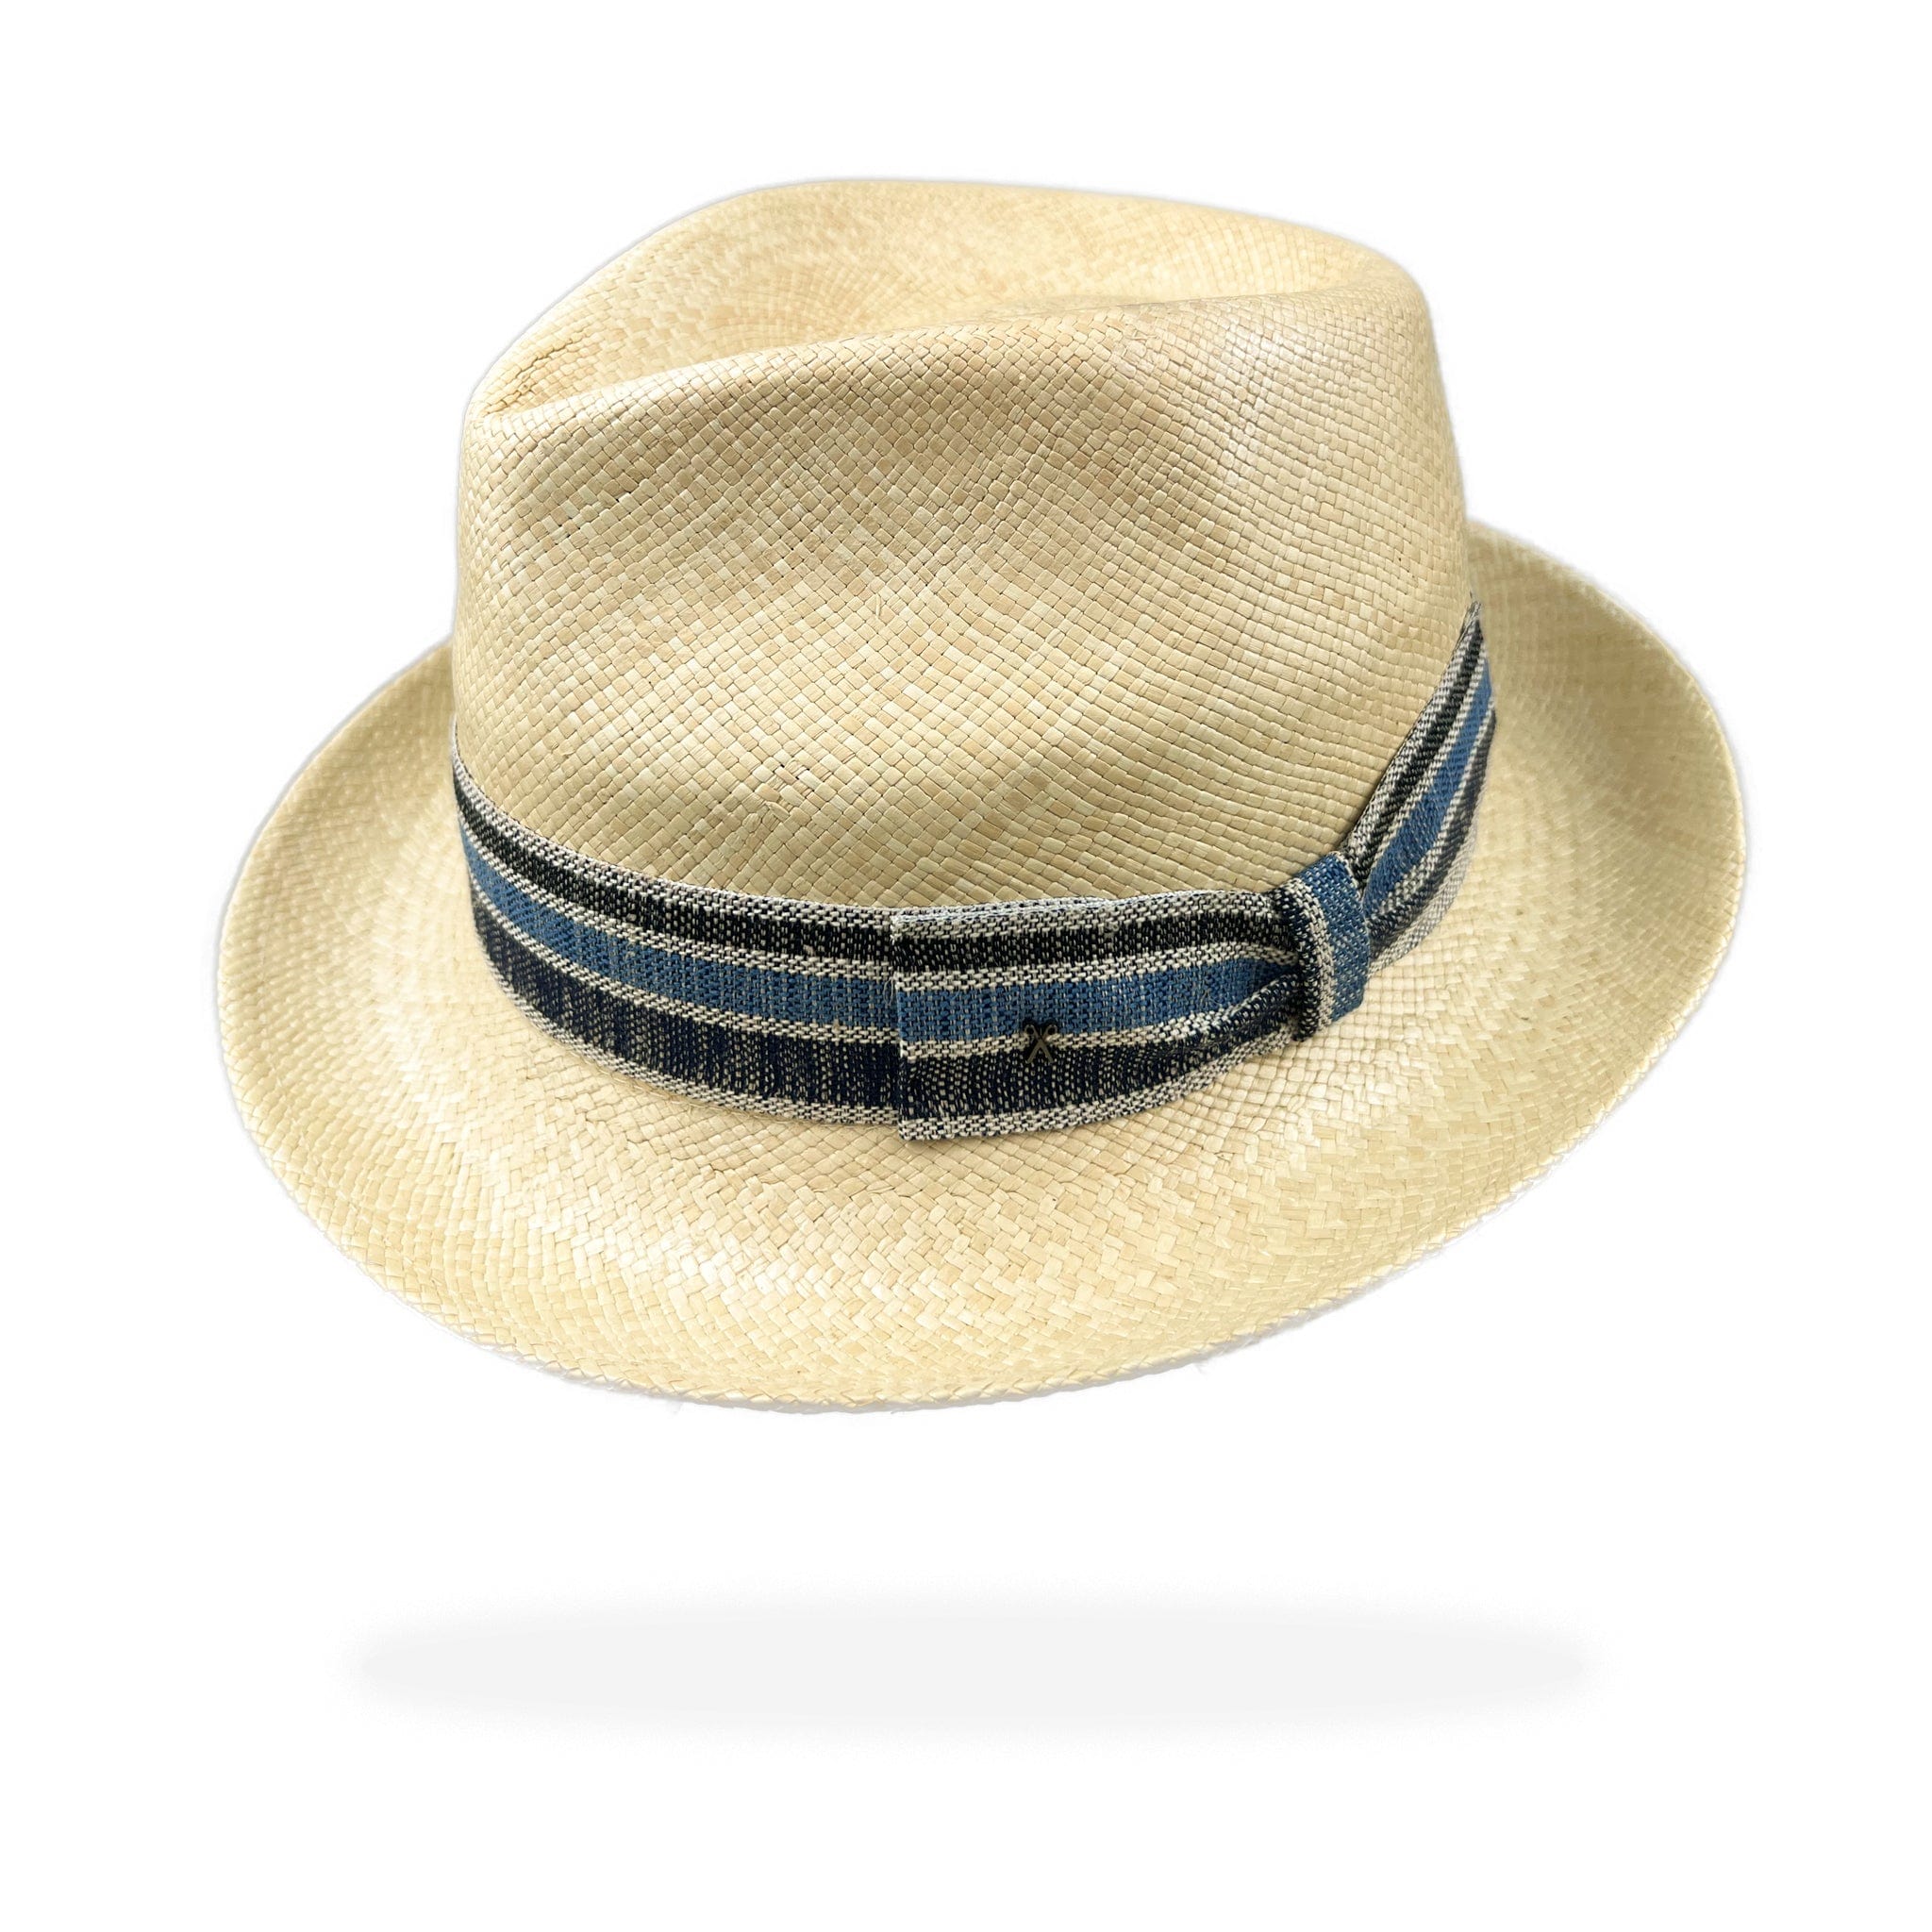 Unisex | Trilby Panama Hat | Natural Toquilla | Blue Multi Band | Made in Italy